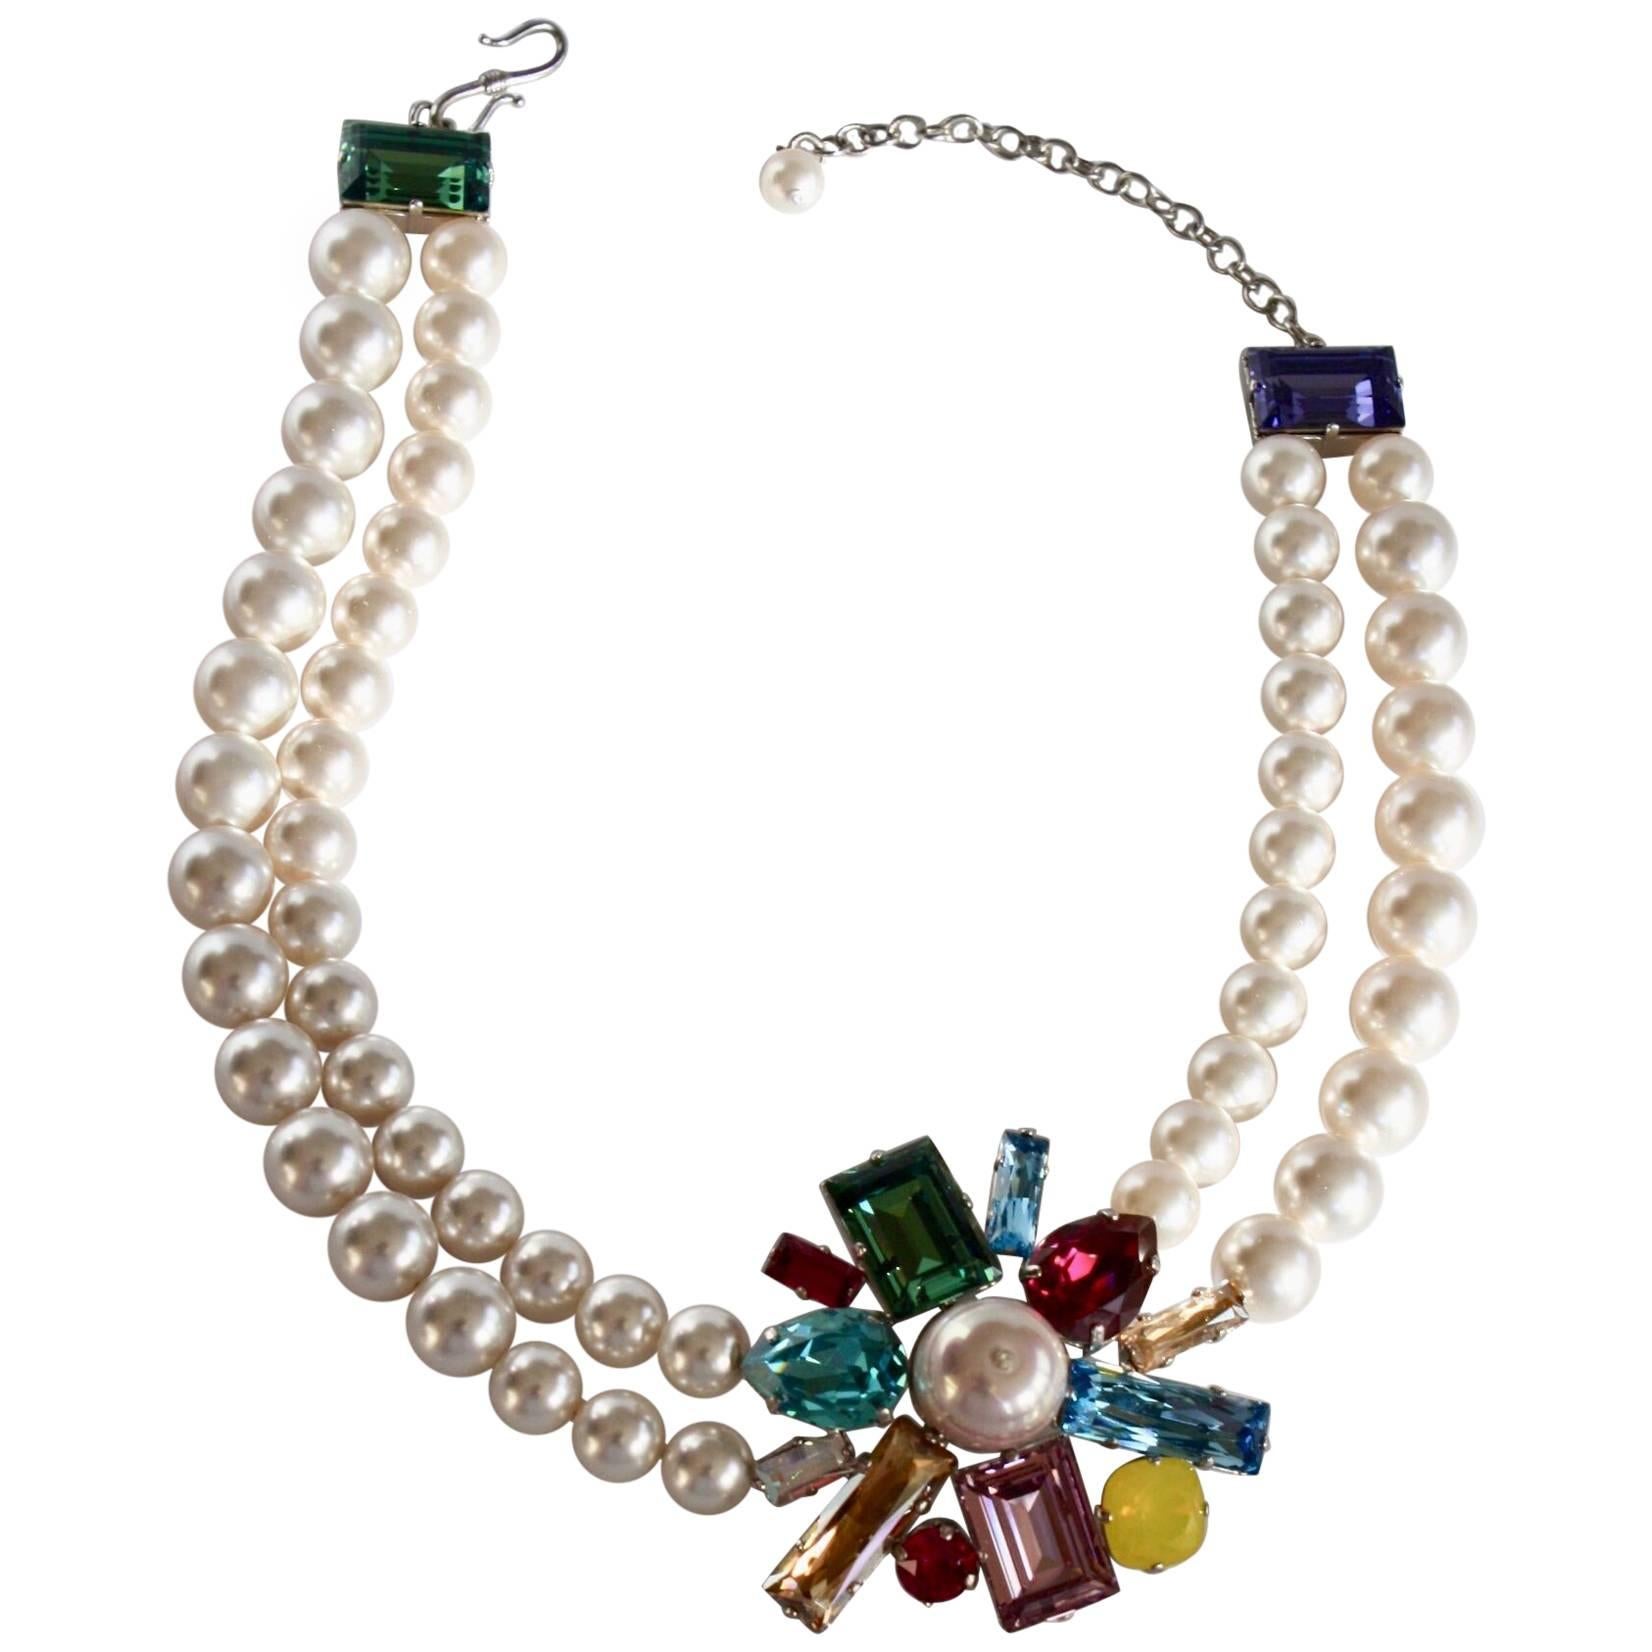 Philippe Ferrandis Glass Pearl and Swarovski Crystal Arlequin Necklace